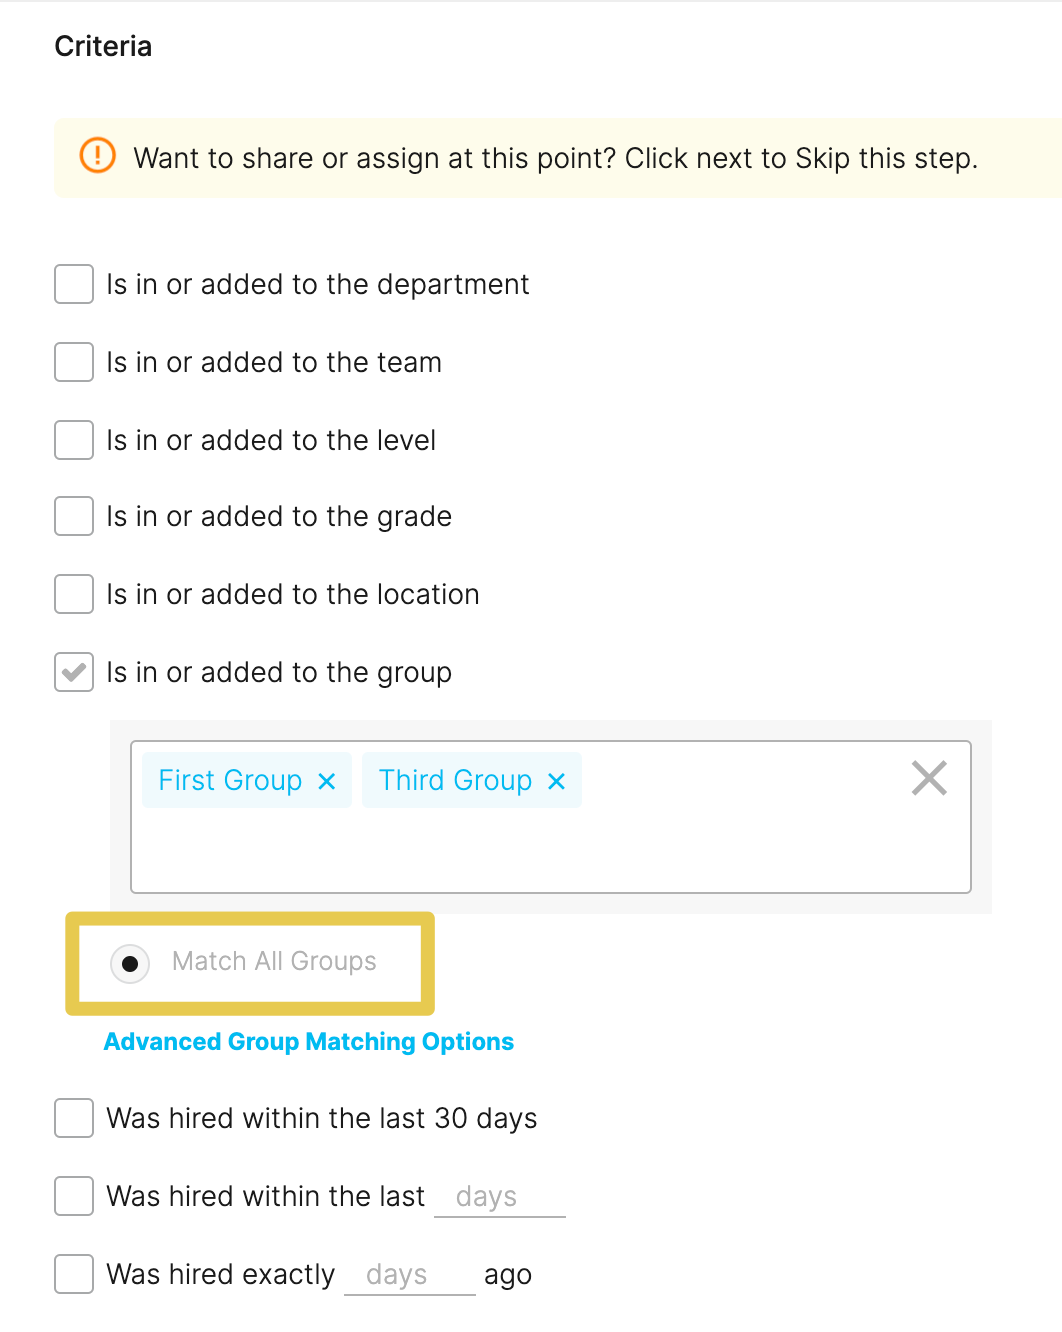 Group_workflow_match_1.png